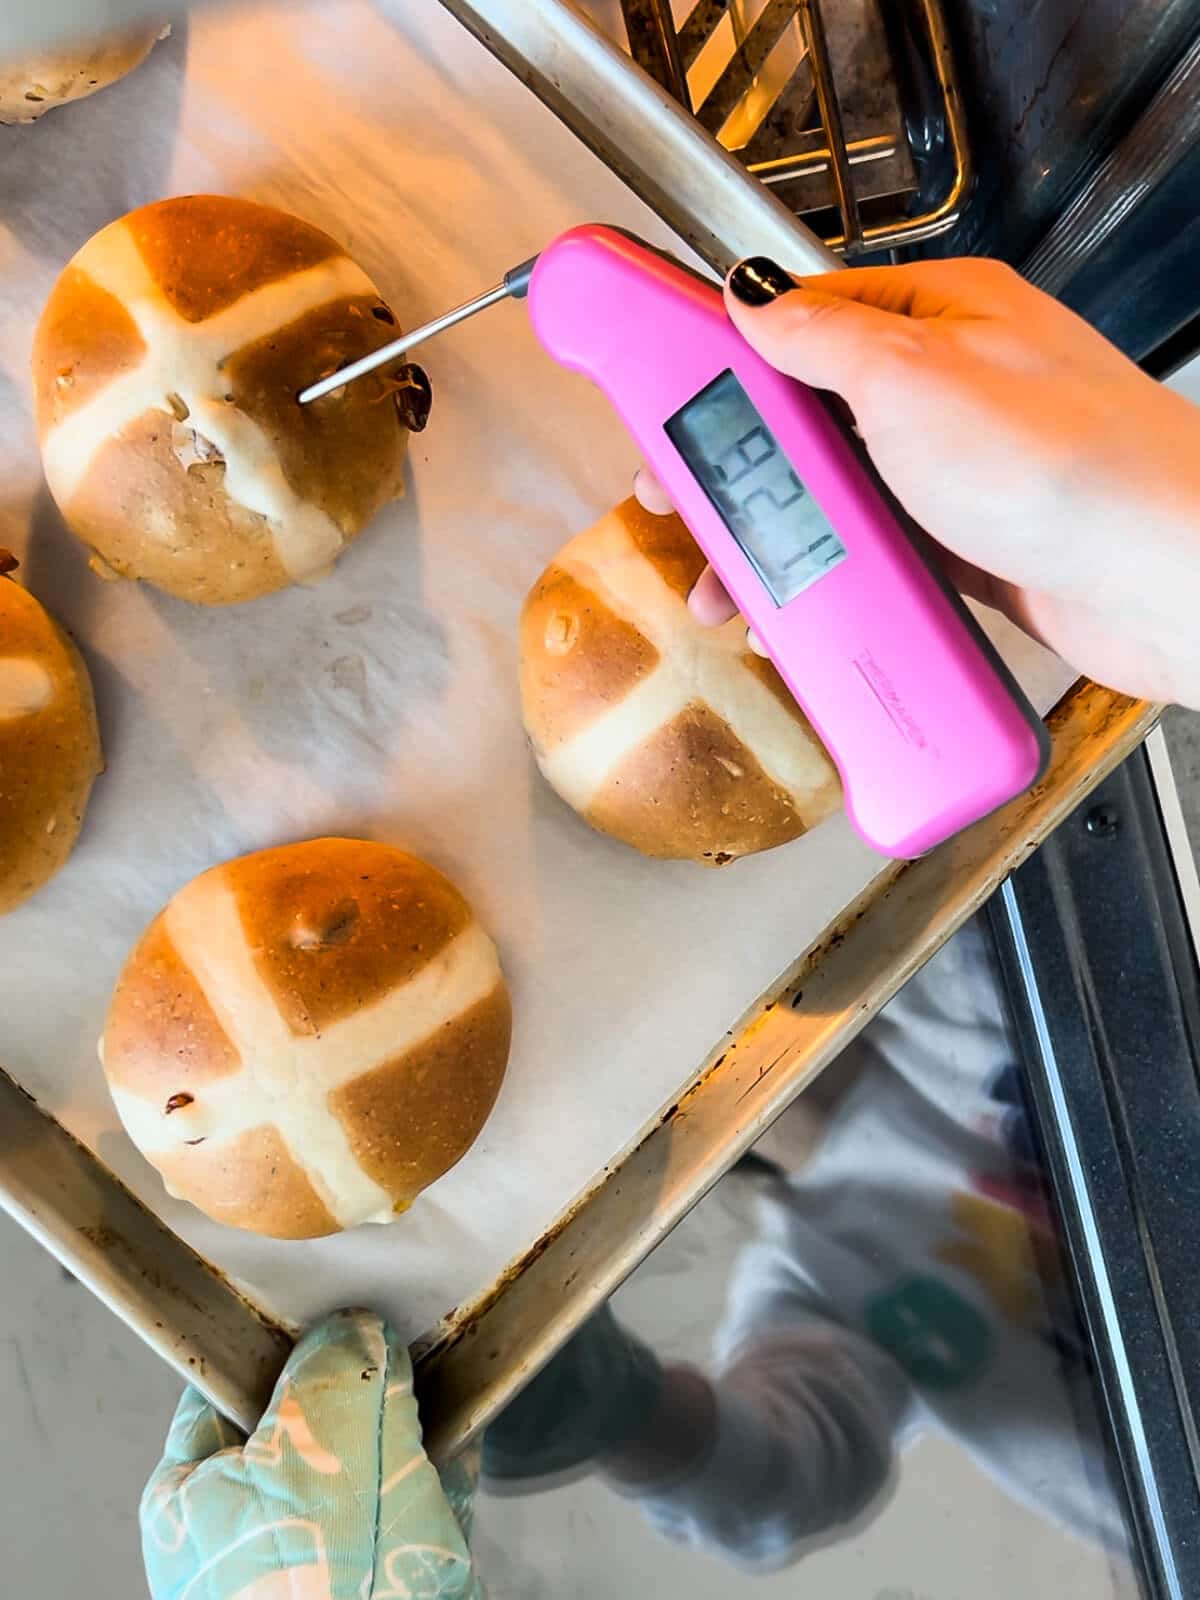 Using a digital thermometer to check the internal temperature of hot cross buns to make sure they are baked through before taking them out of the oven.